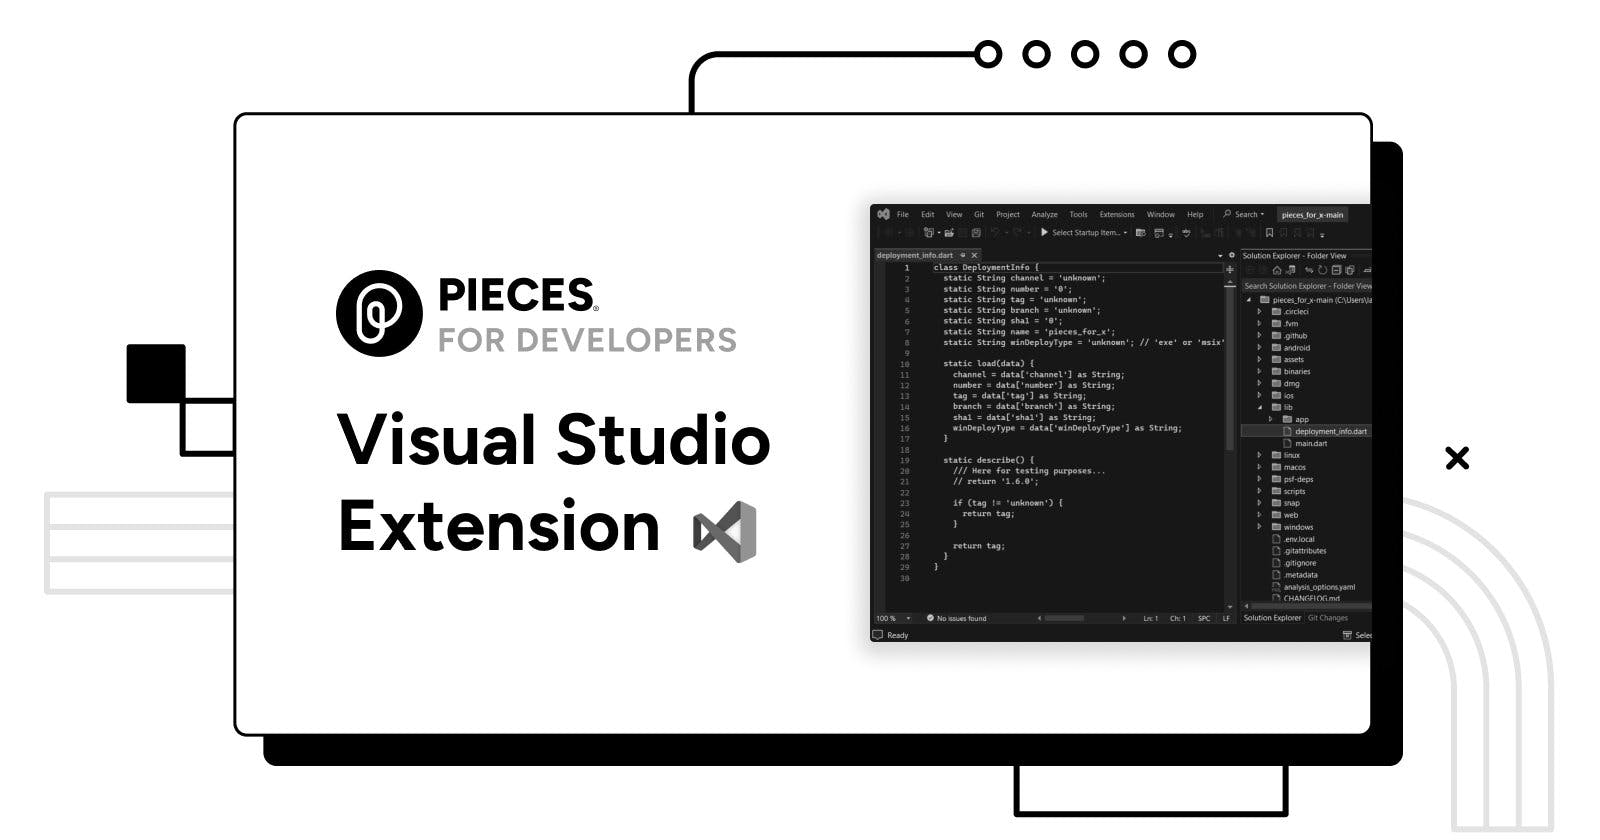 You’ve Been Asking for it…Announcing the Pieces for Developers Visual Studio Extension!